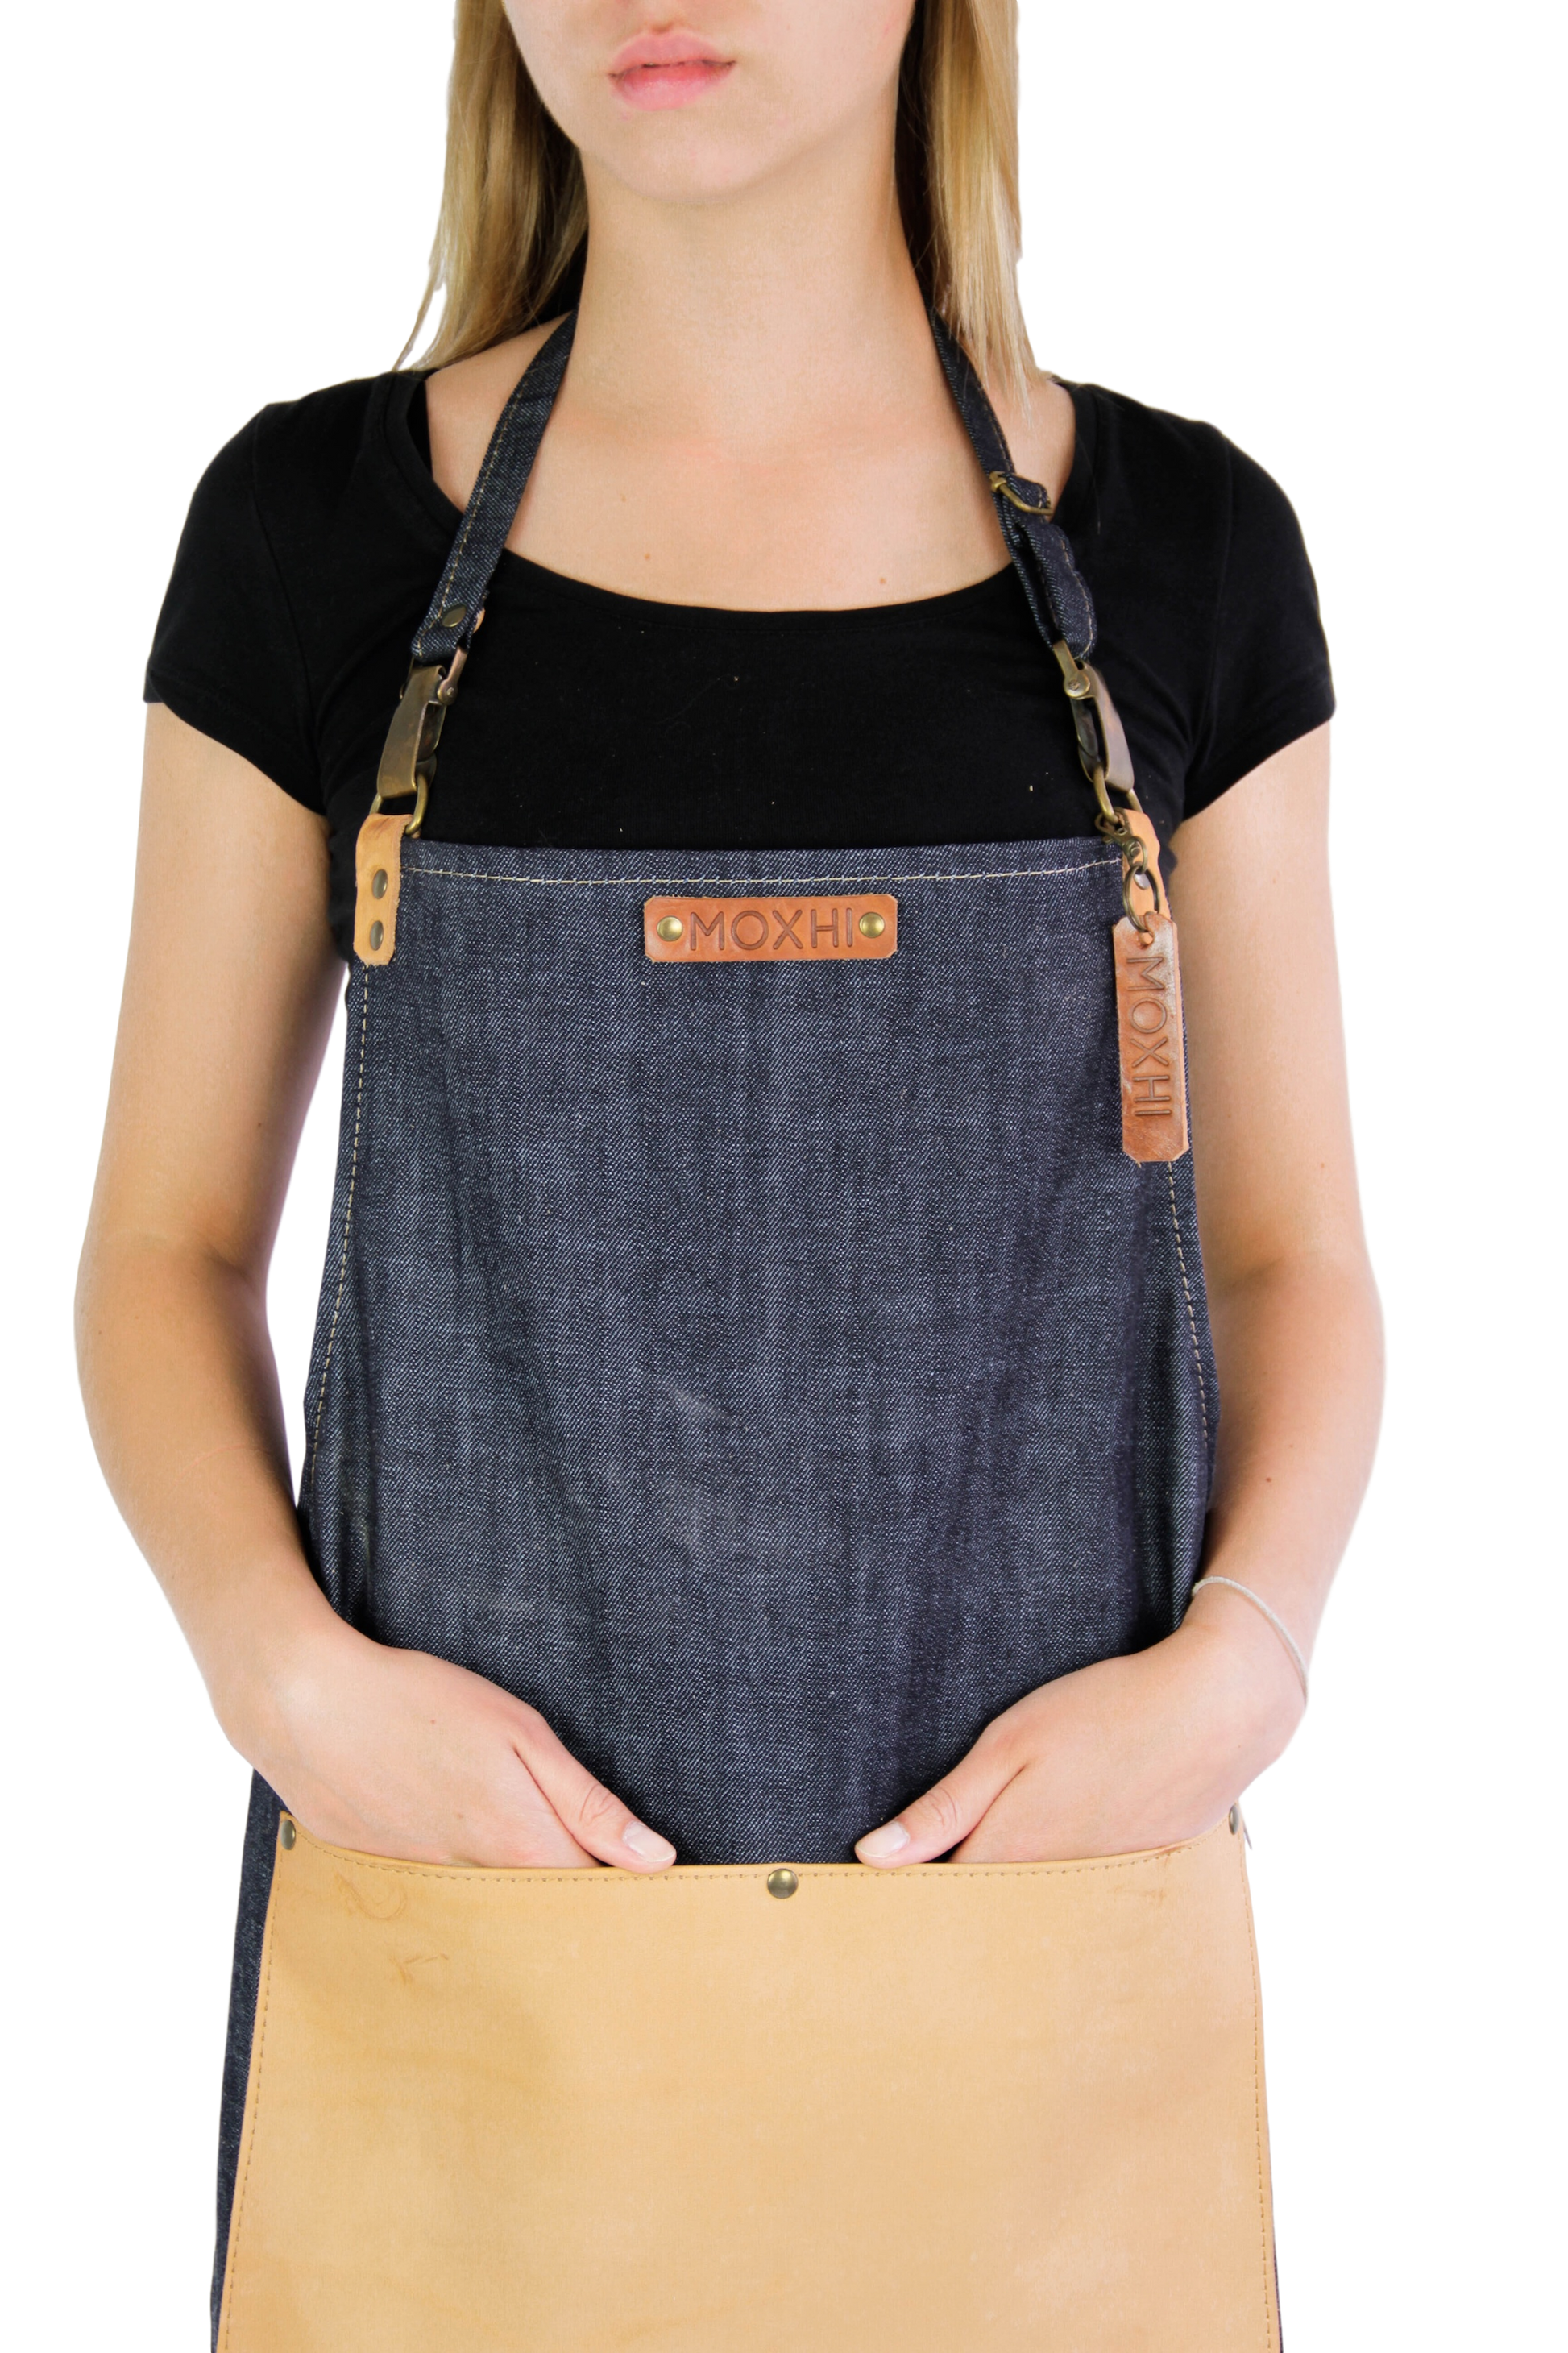 Handmade leather apron for women